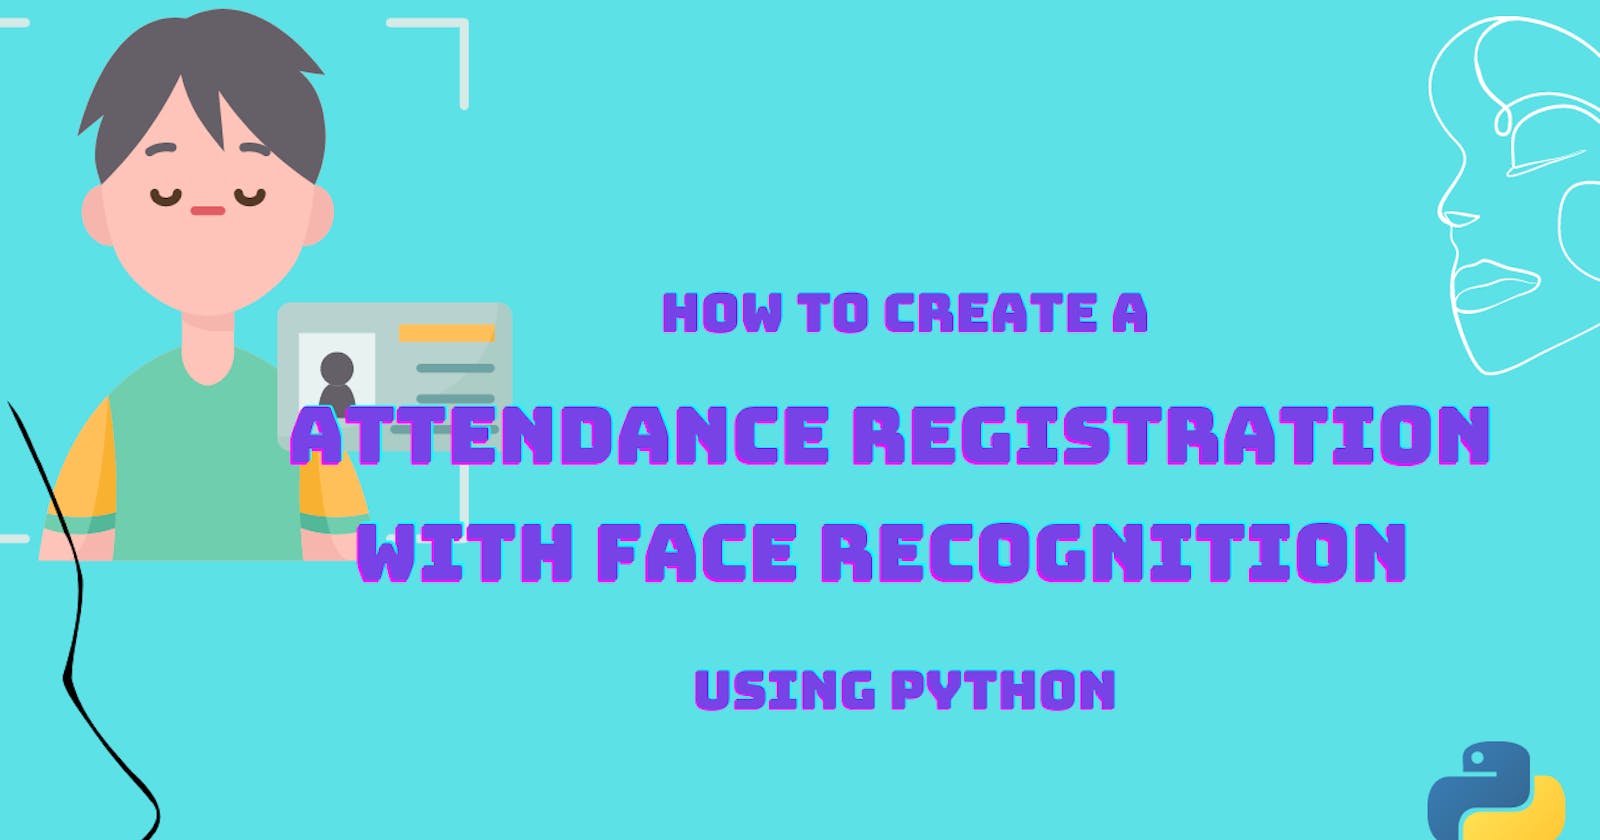 How to create an Attendance Registration with face recognition application using python